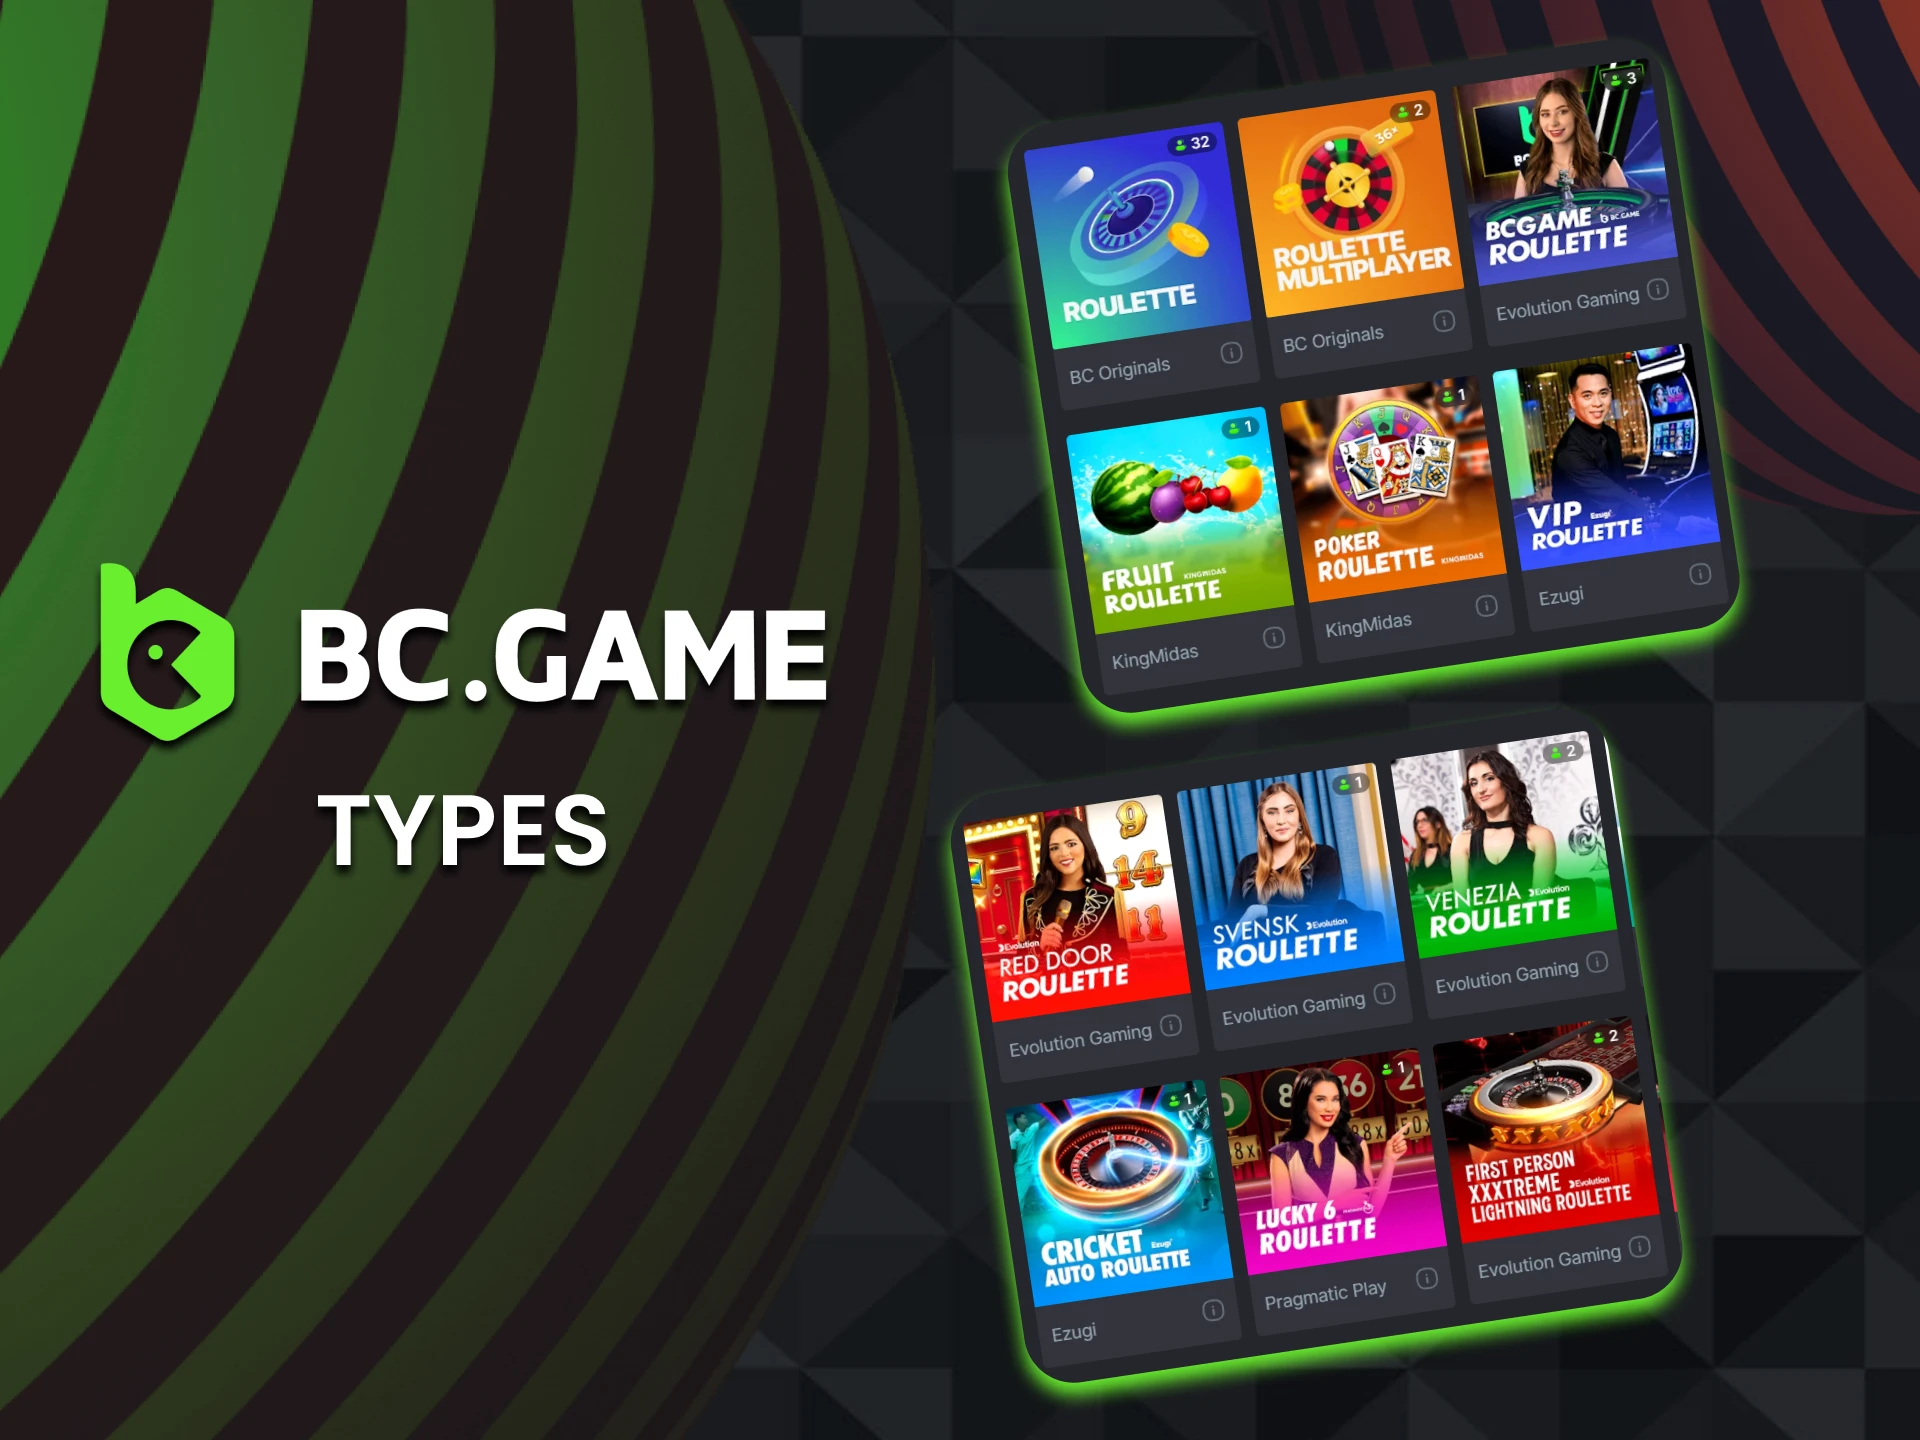 We will tell you about the types of roulette games on BC Game.